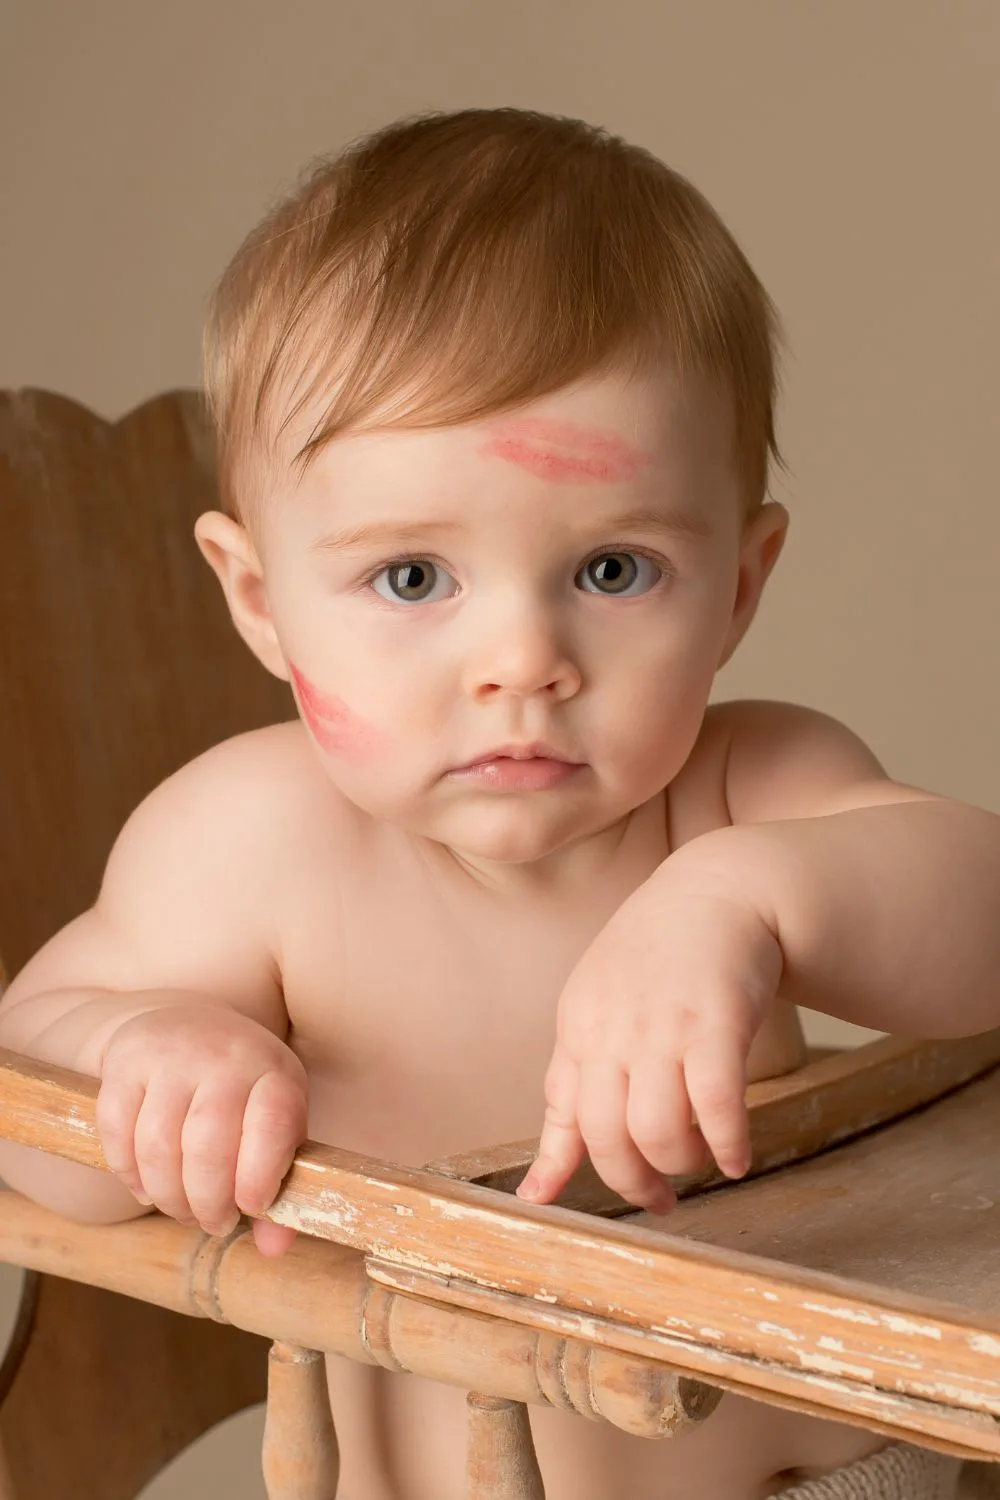 Photo of a baby in a high chair with lipstick kisses on their face.